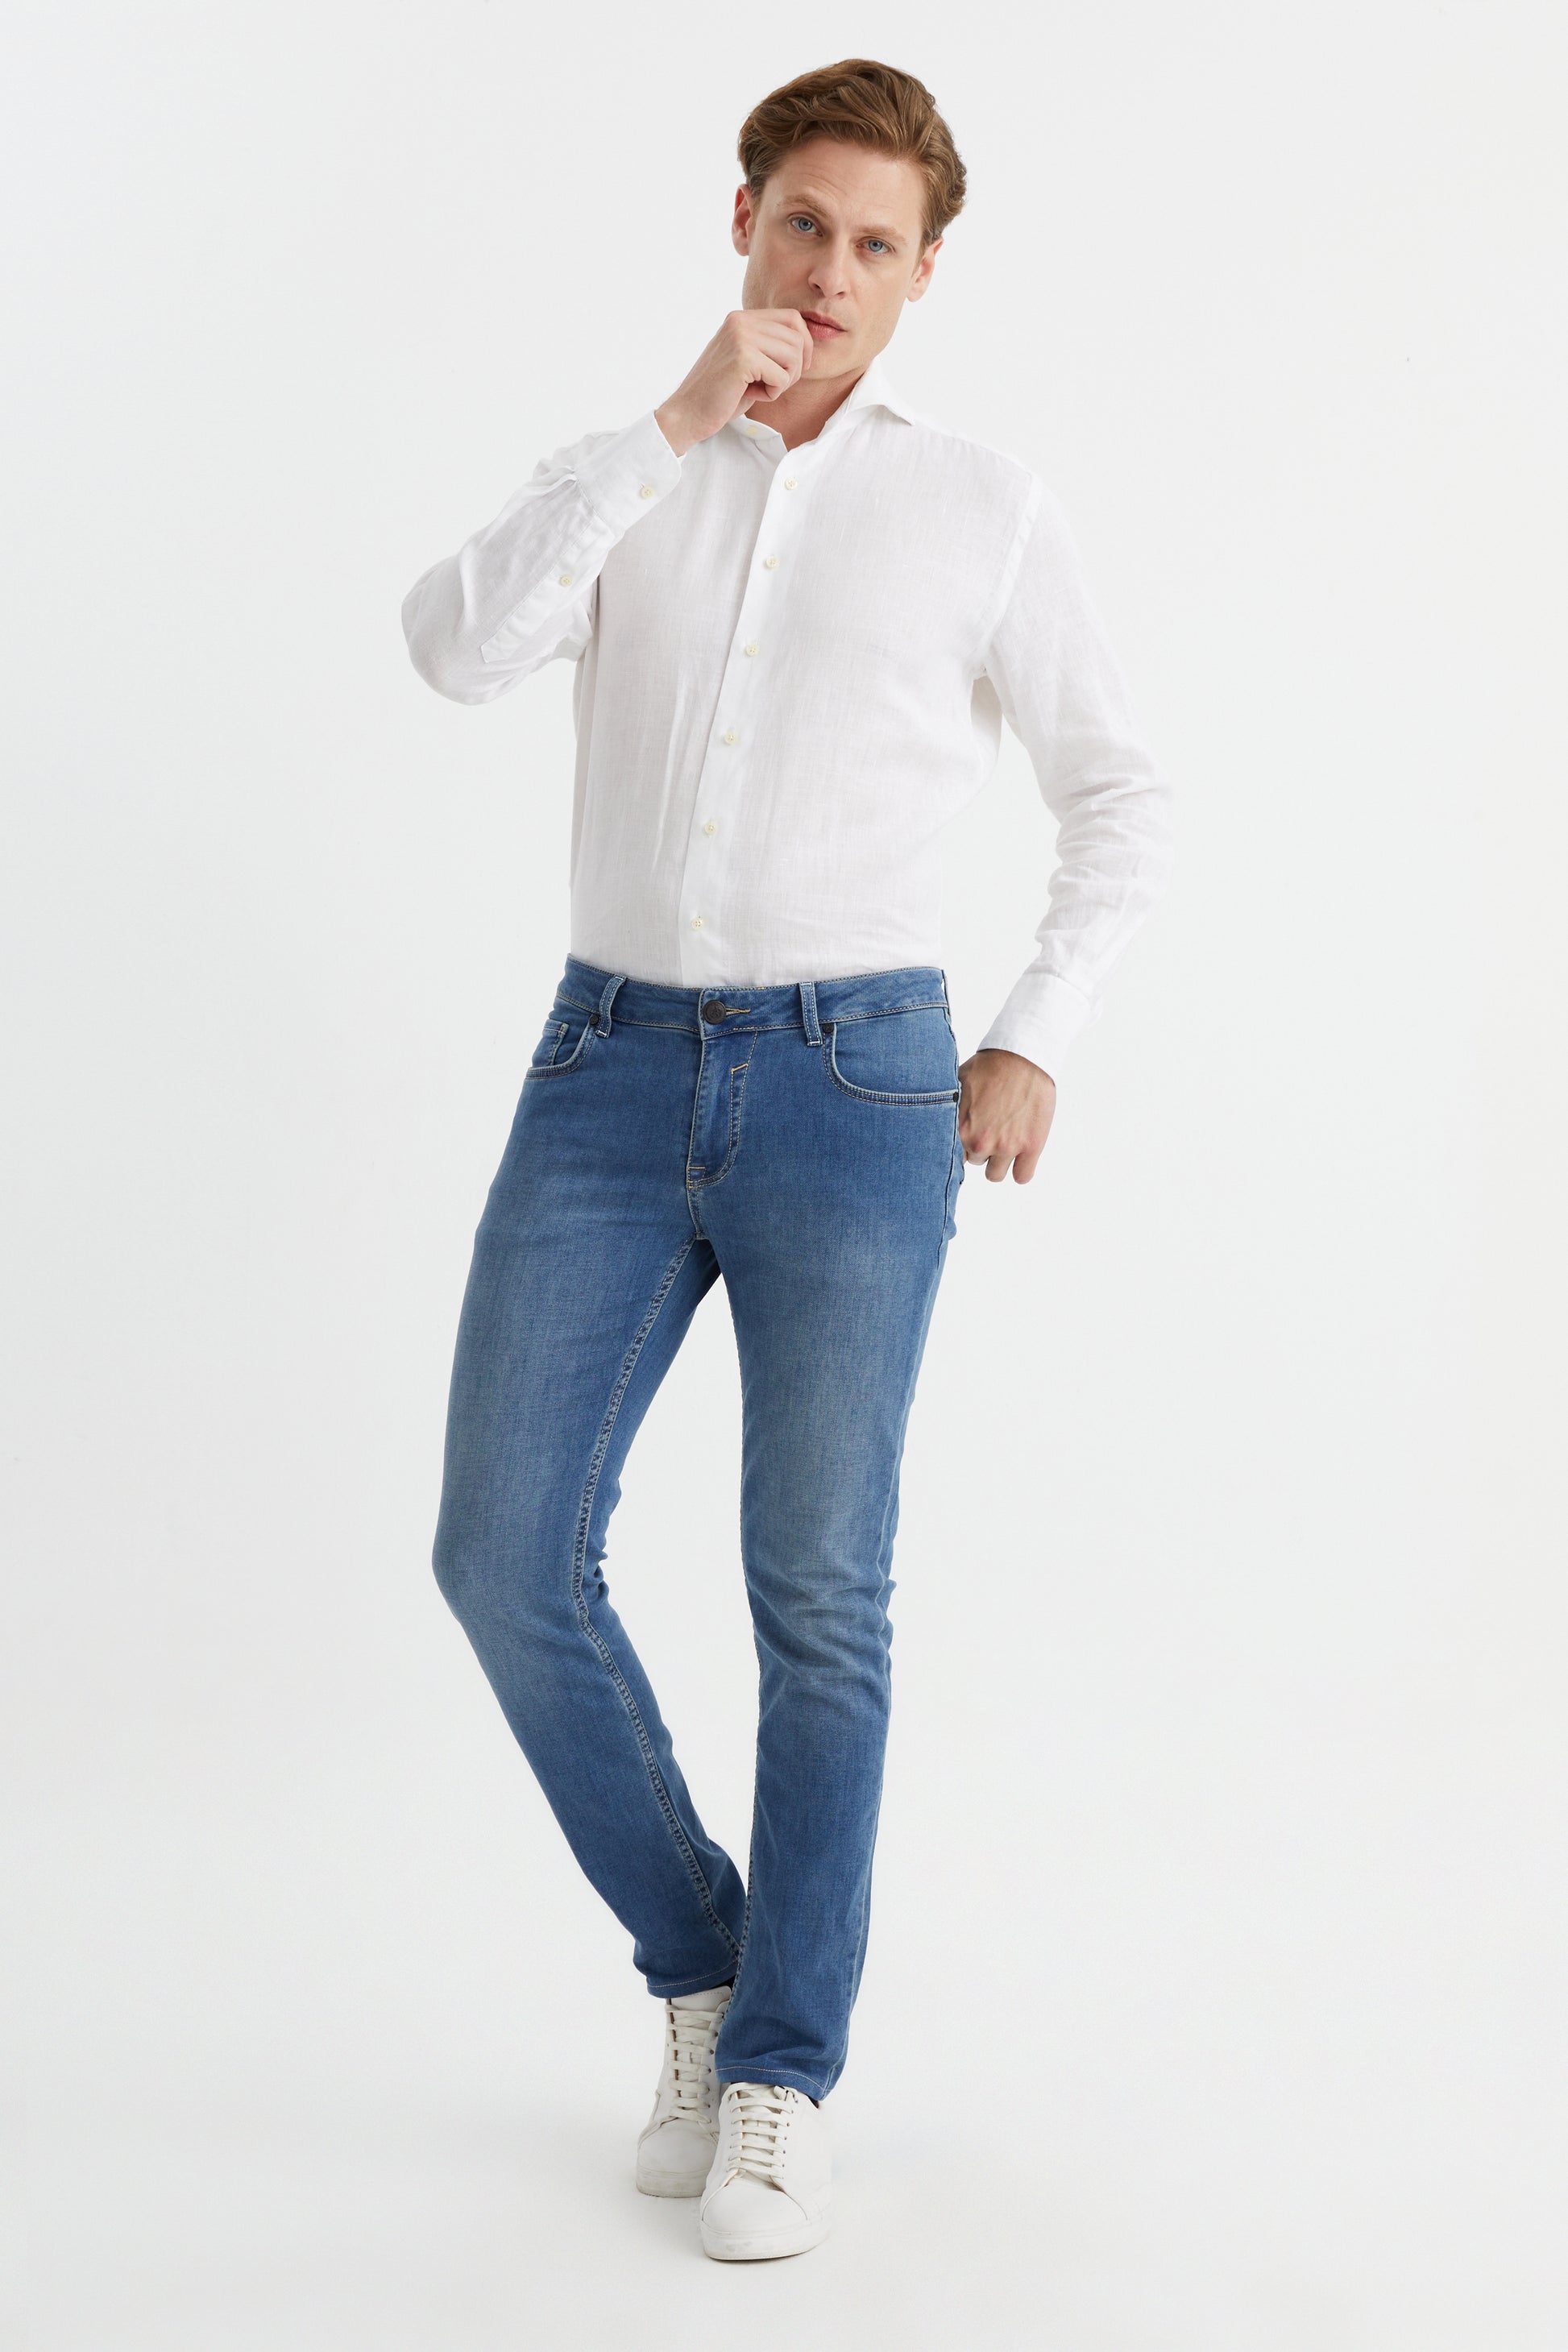 These ultra comfortable, slim premium light blue denim jeans from DFR89 are a must-have for any man who values fashion and comfort.